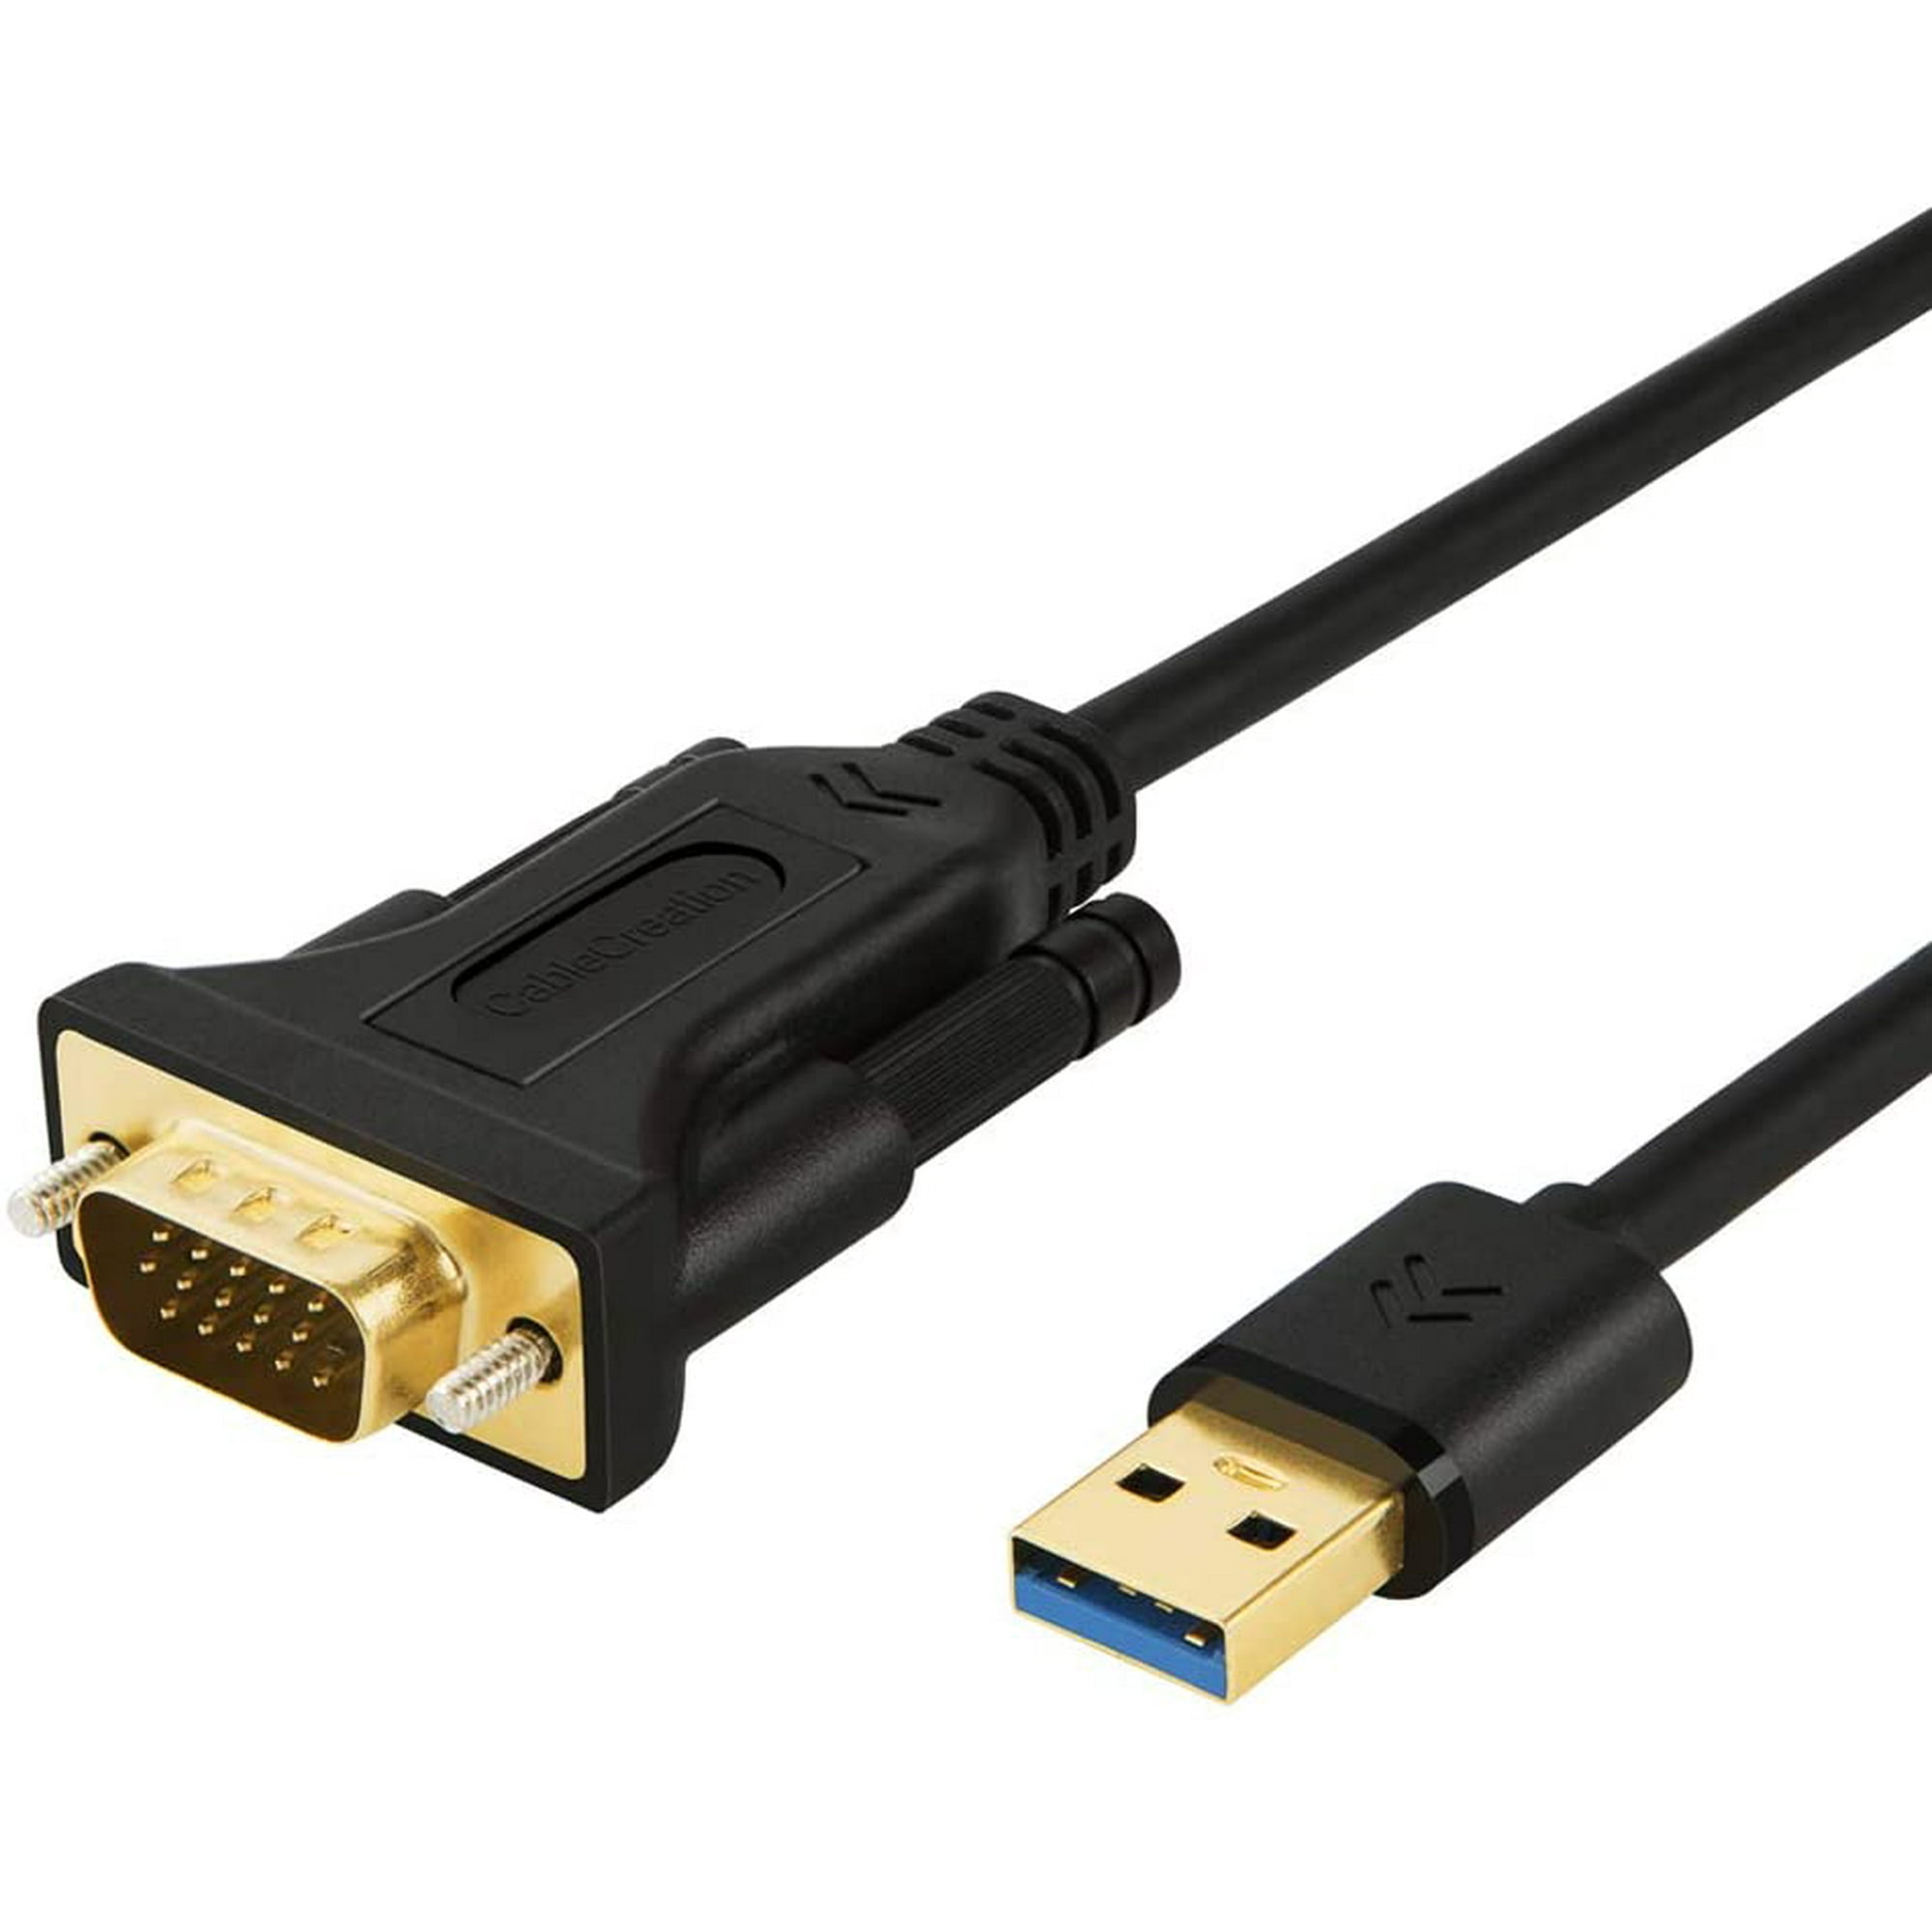 USB 3.0 to VGA Cable 6FT, CableCreation USB to VGA Adapter Cord 1080P @ 60Hz, External Video Only Support Windows | Walmart Canada